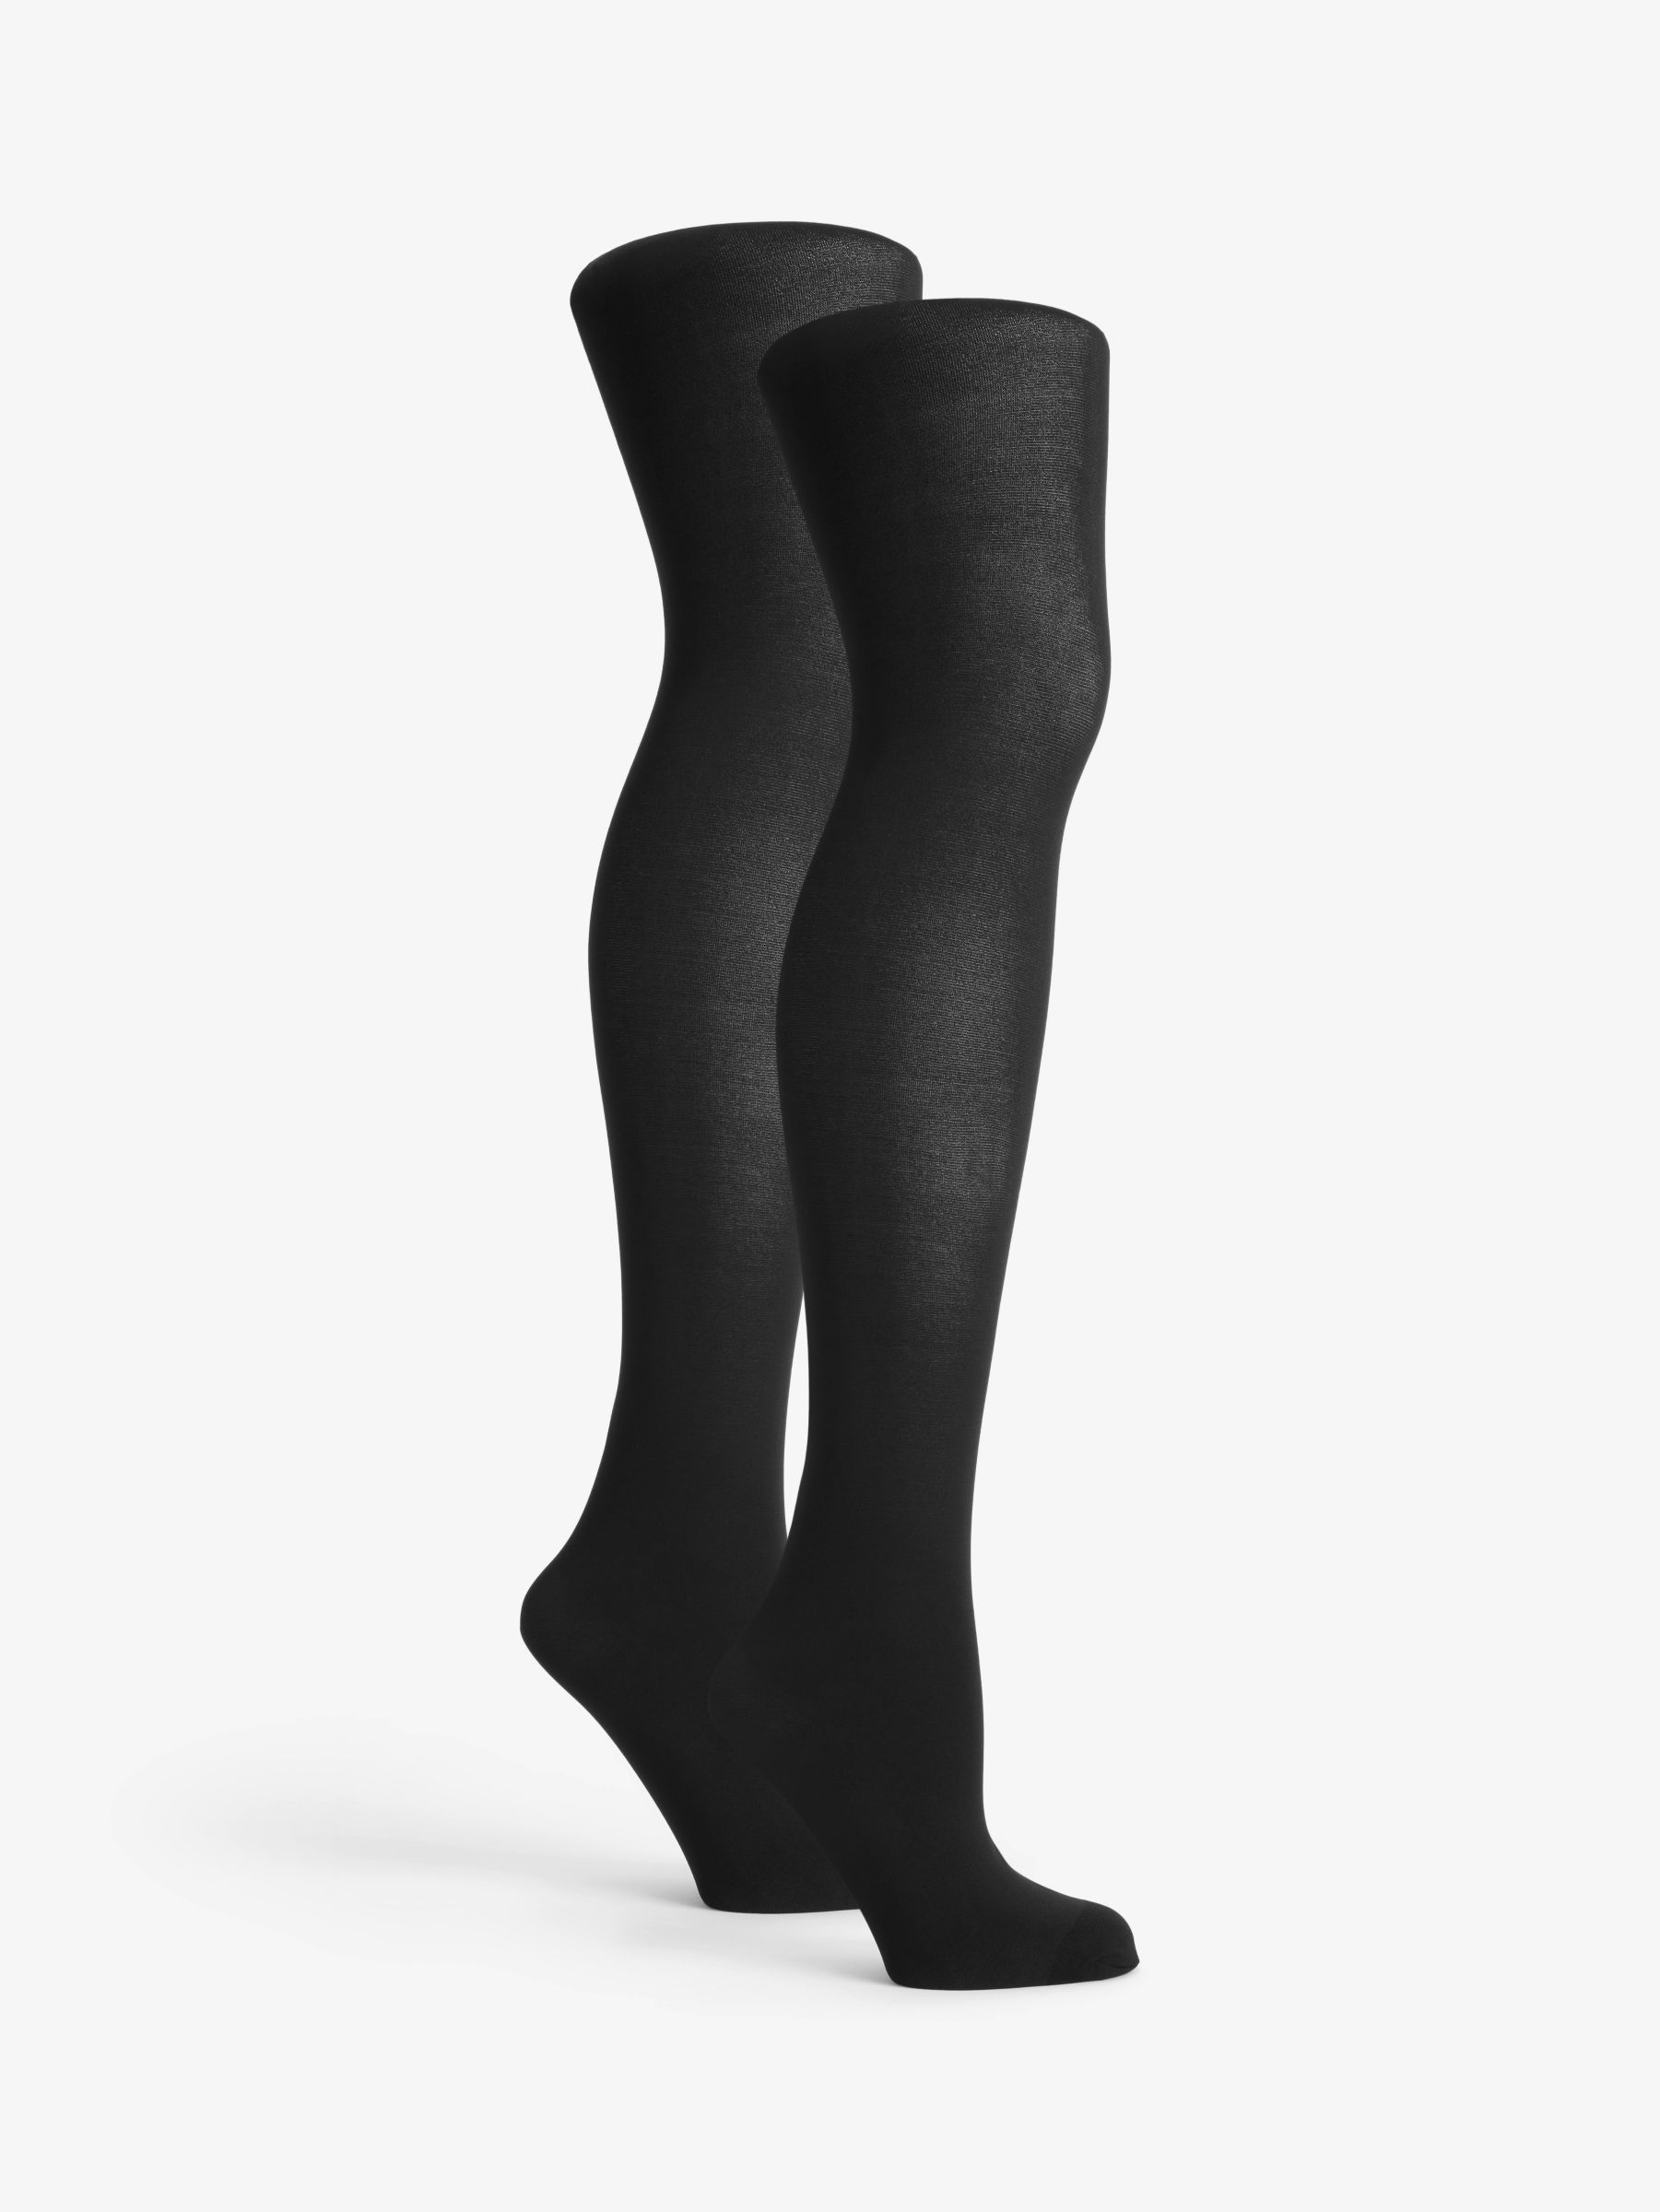 John Lewis ANYDAY 80 Denier Opaque Tights, Pack of 2, Black, S